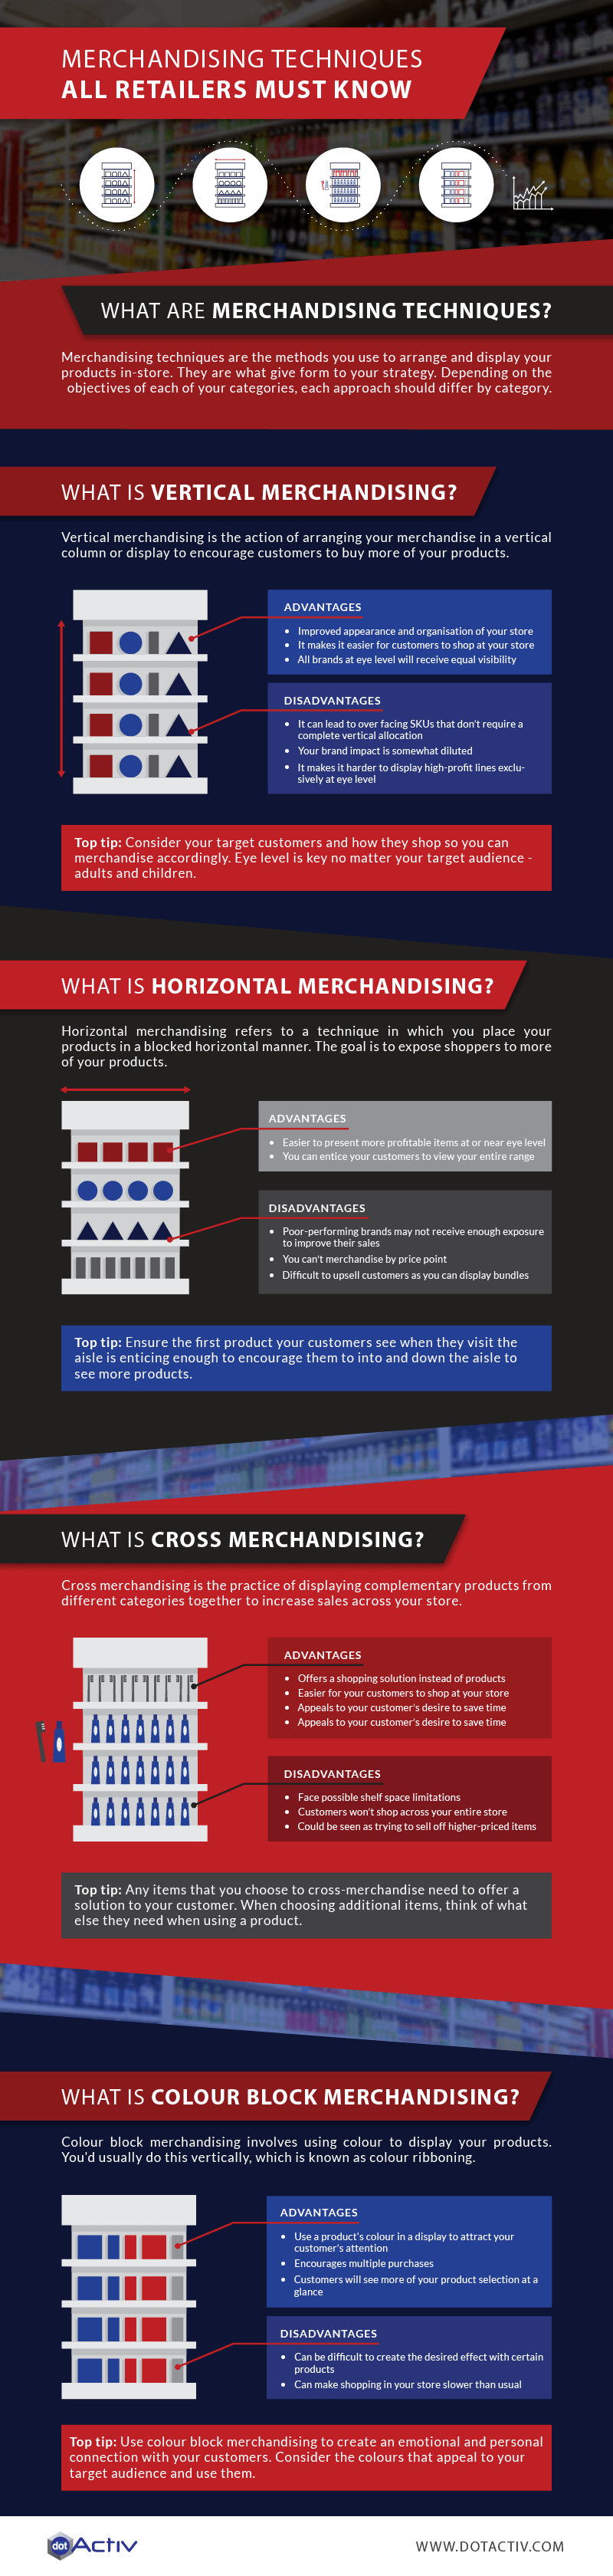 Merchandising Techniques All Retailers Must Know Infographic